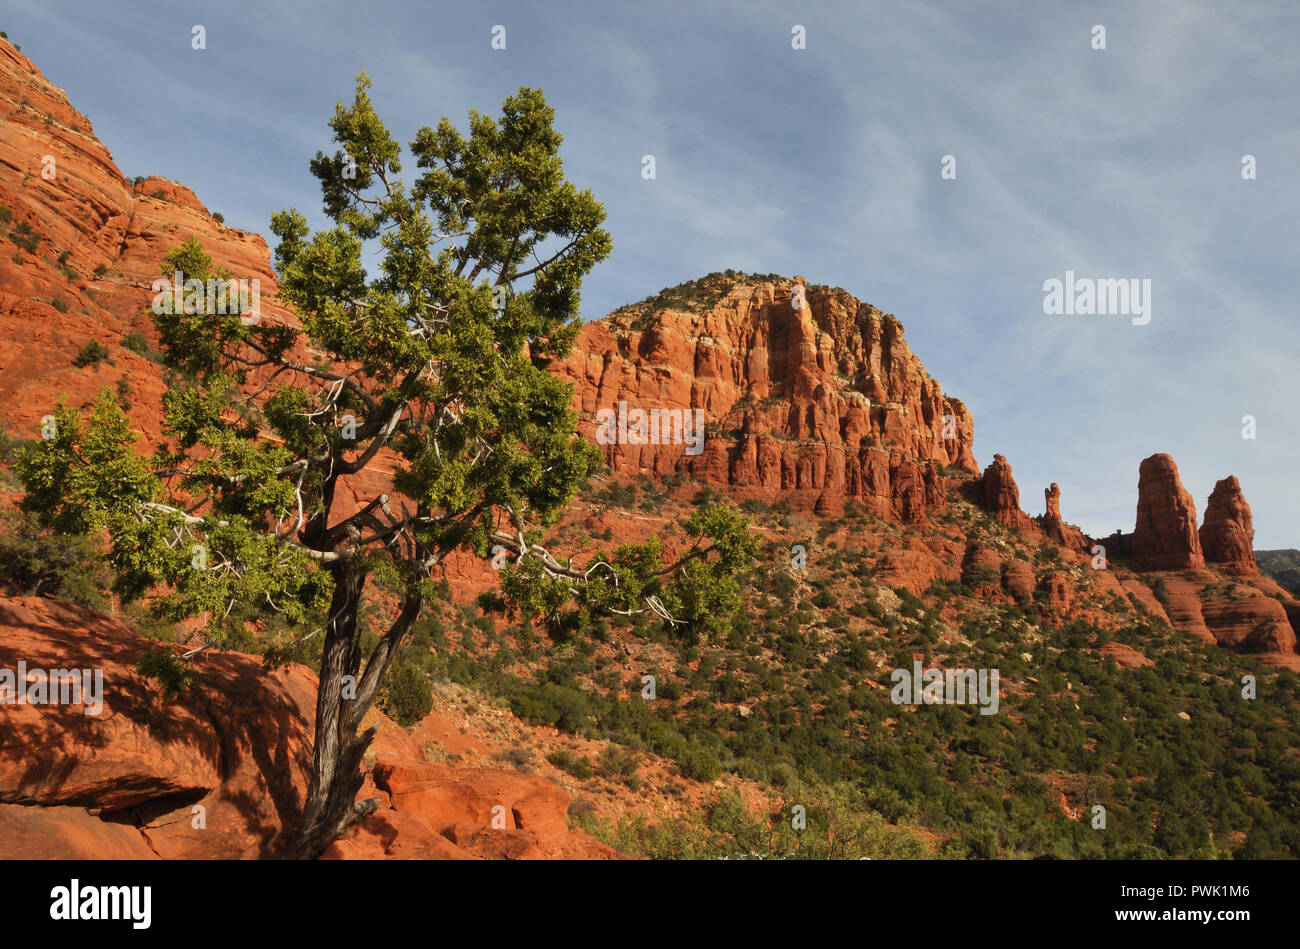 Landscape image showing some of the dramatic red rock formations in Sedona, Arizona, including those called Madonna and Child and the Two Nuns. Stock Photo